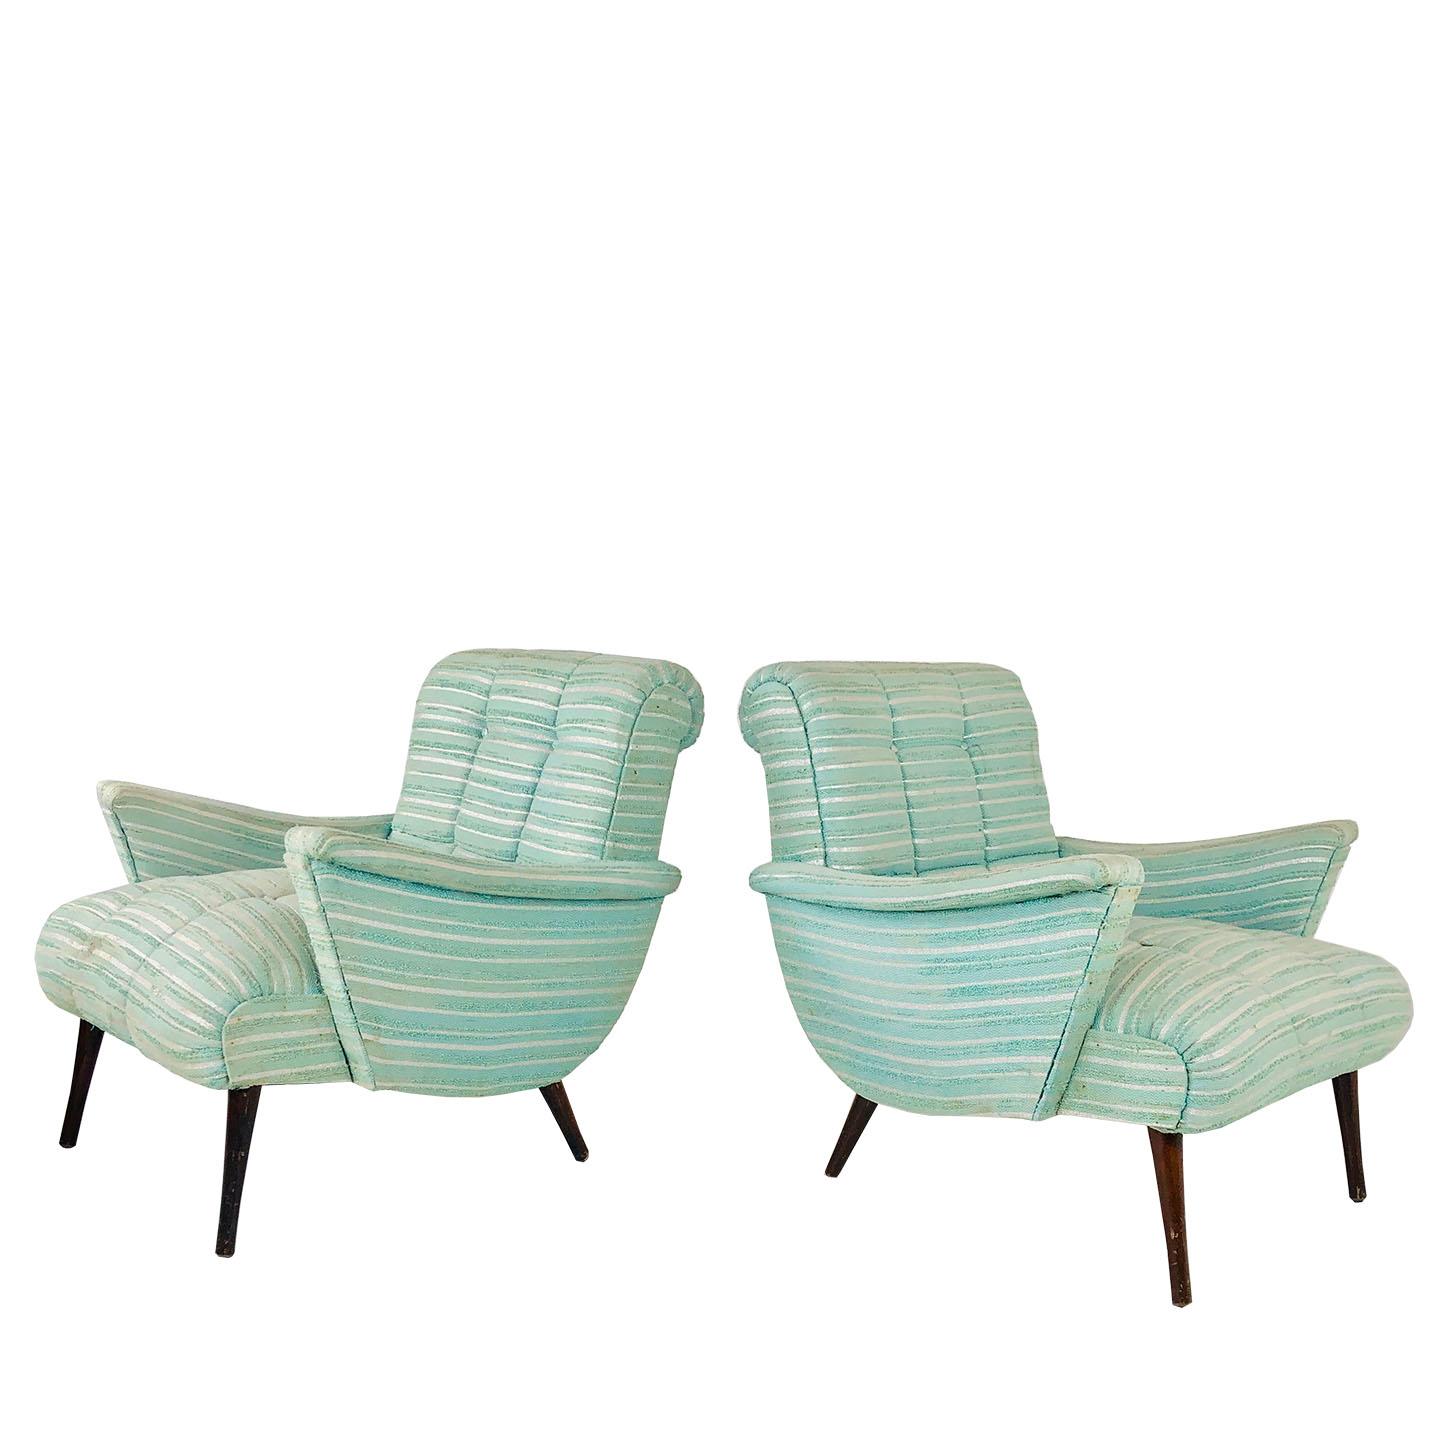 Pair Of Pierre Paulin 1970s Groovy Chairs For Sale At 1stdibs